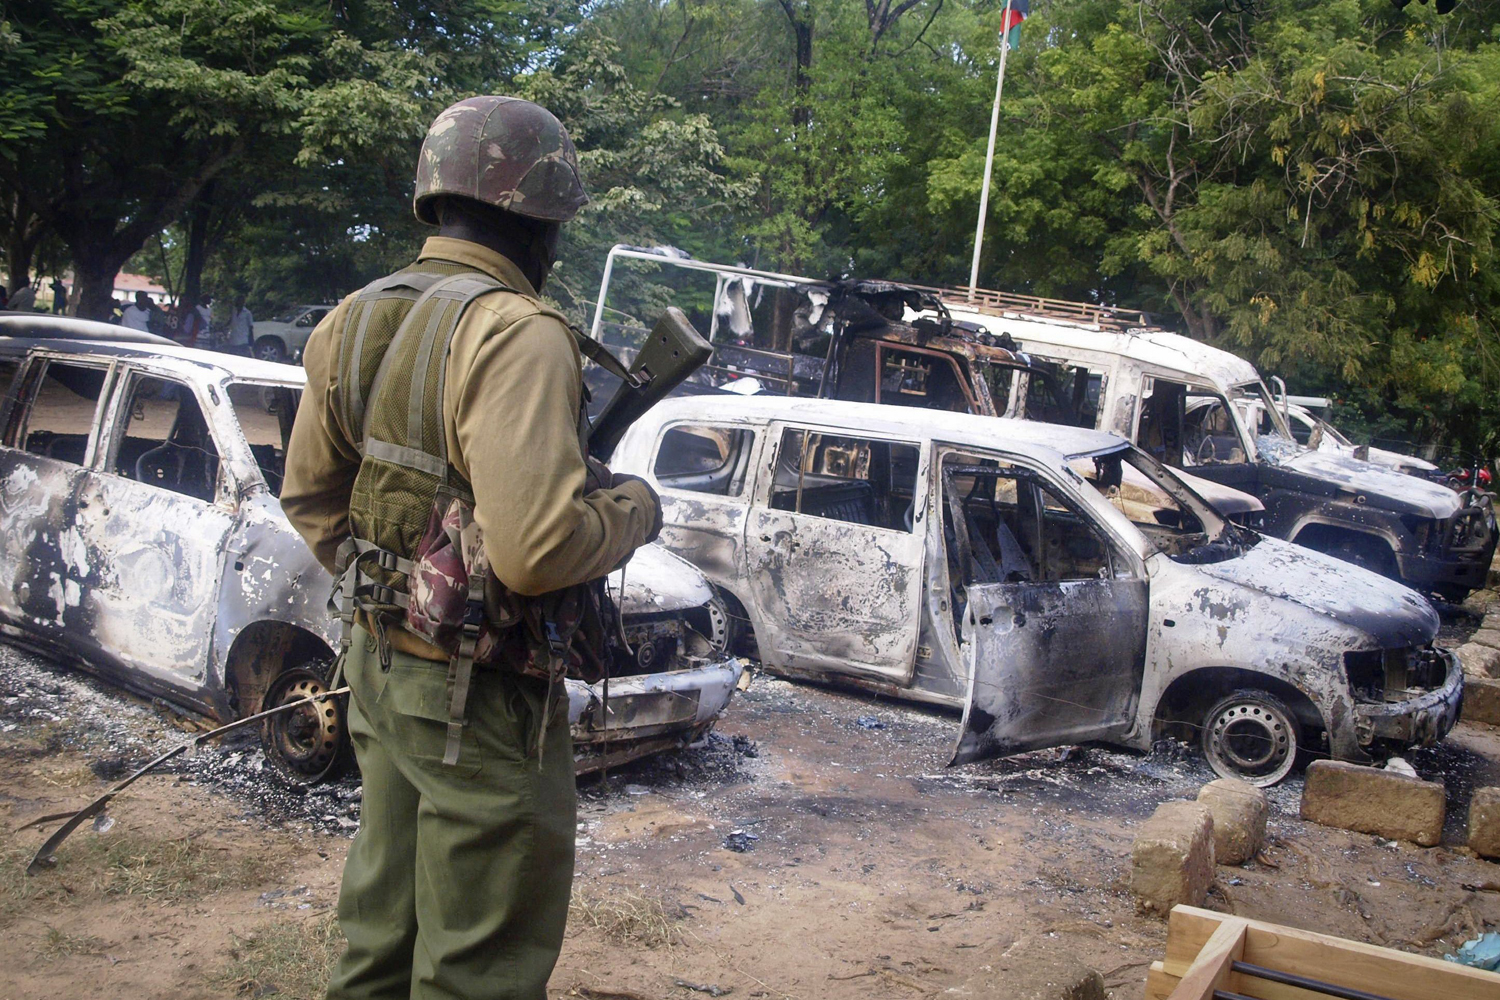 A member of the Kenyan security forces observes the remains of vehicles destroyed by militants, in the village of Kibaoni just outside the town of Mpeketoni, about 60 miles from the Somali border on the coast of Kenya, June 16, 2014.